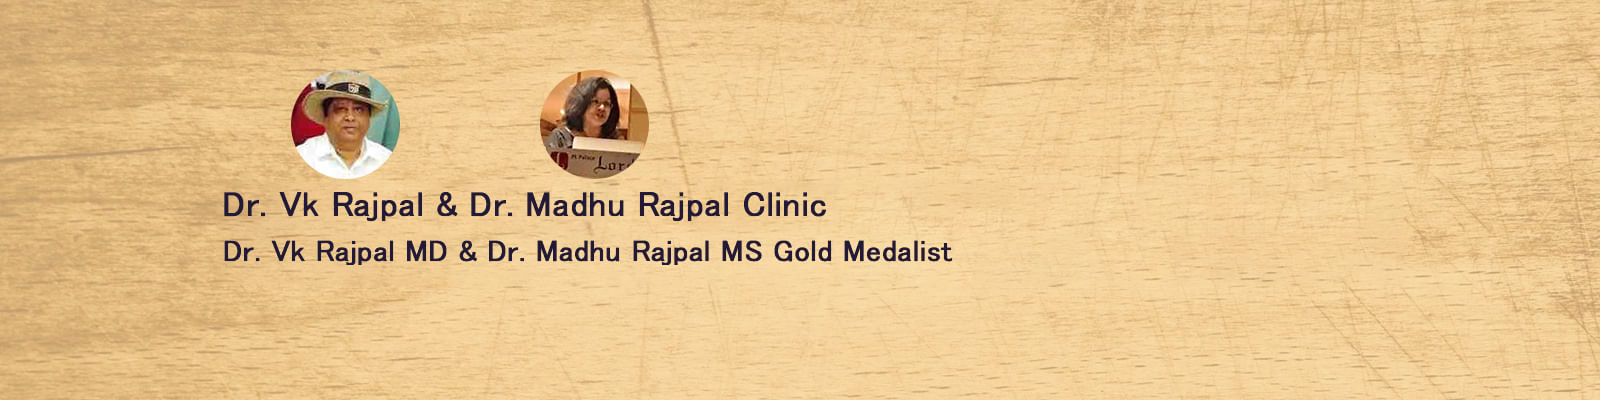 Dr. Vk Rajpal MD & Dr. Madhu Rajpal MS Gold Medalist For Sexual Health